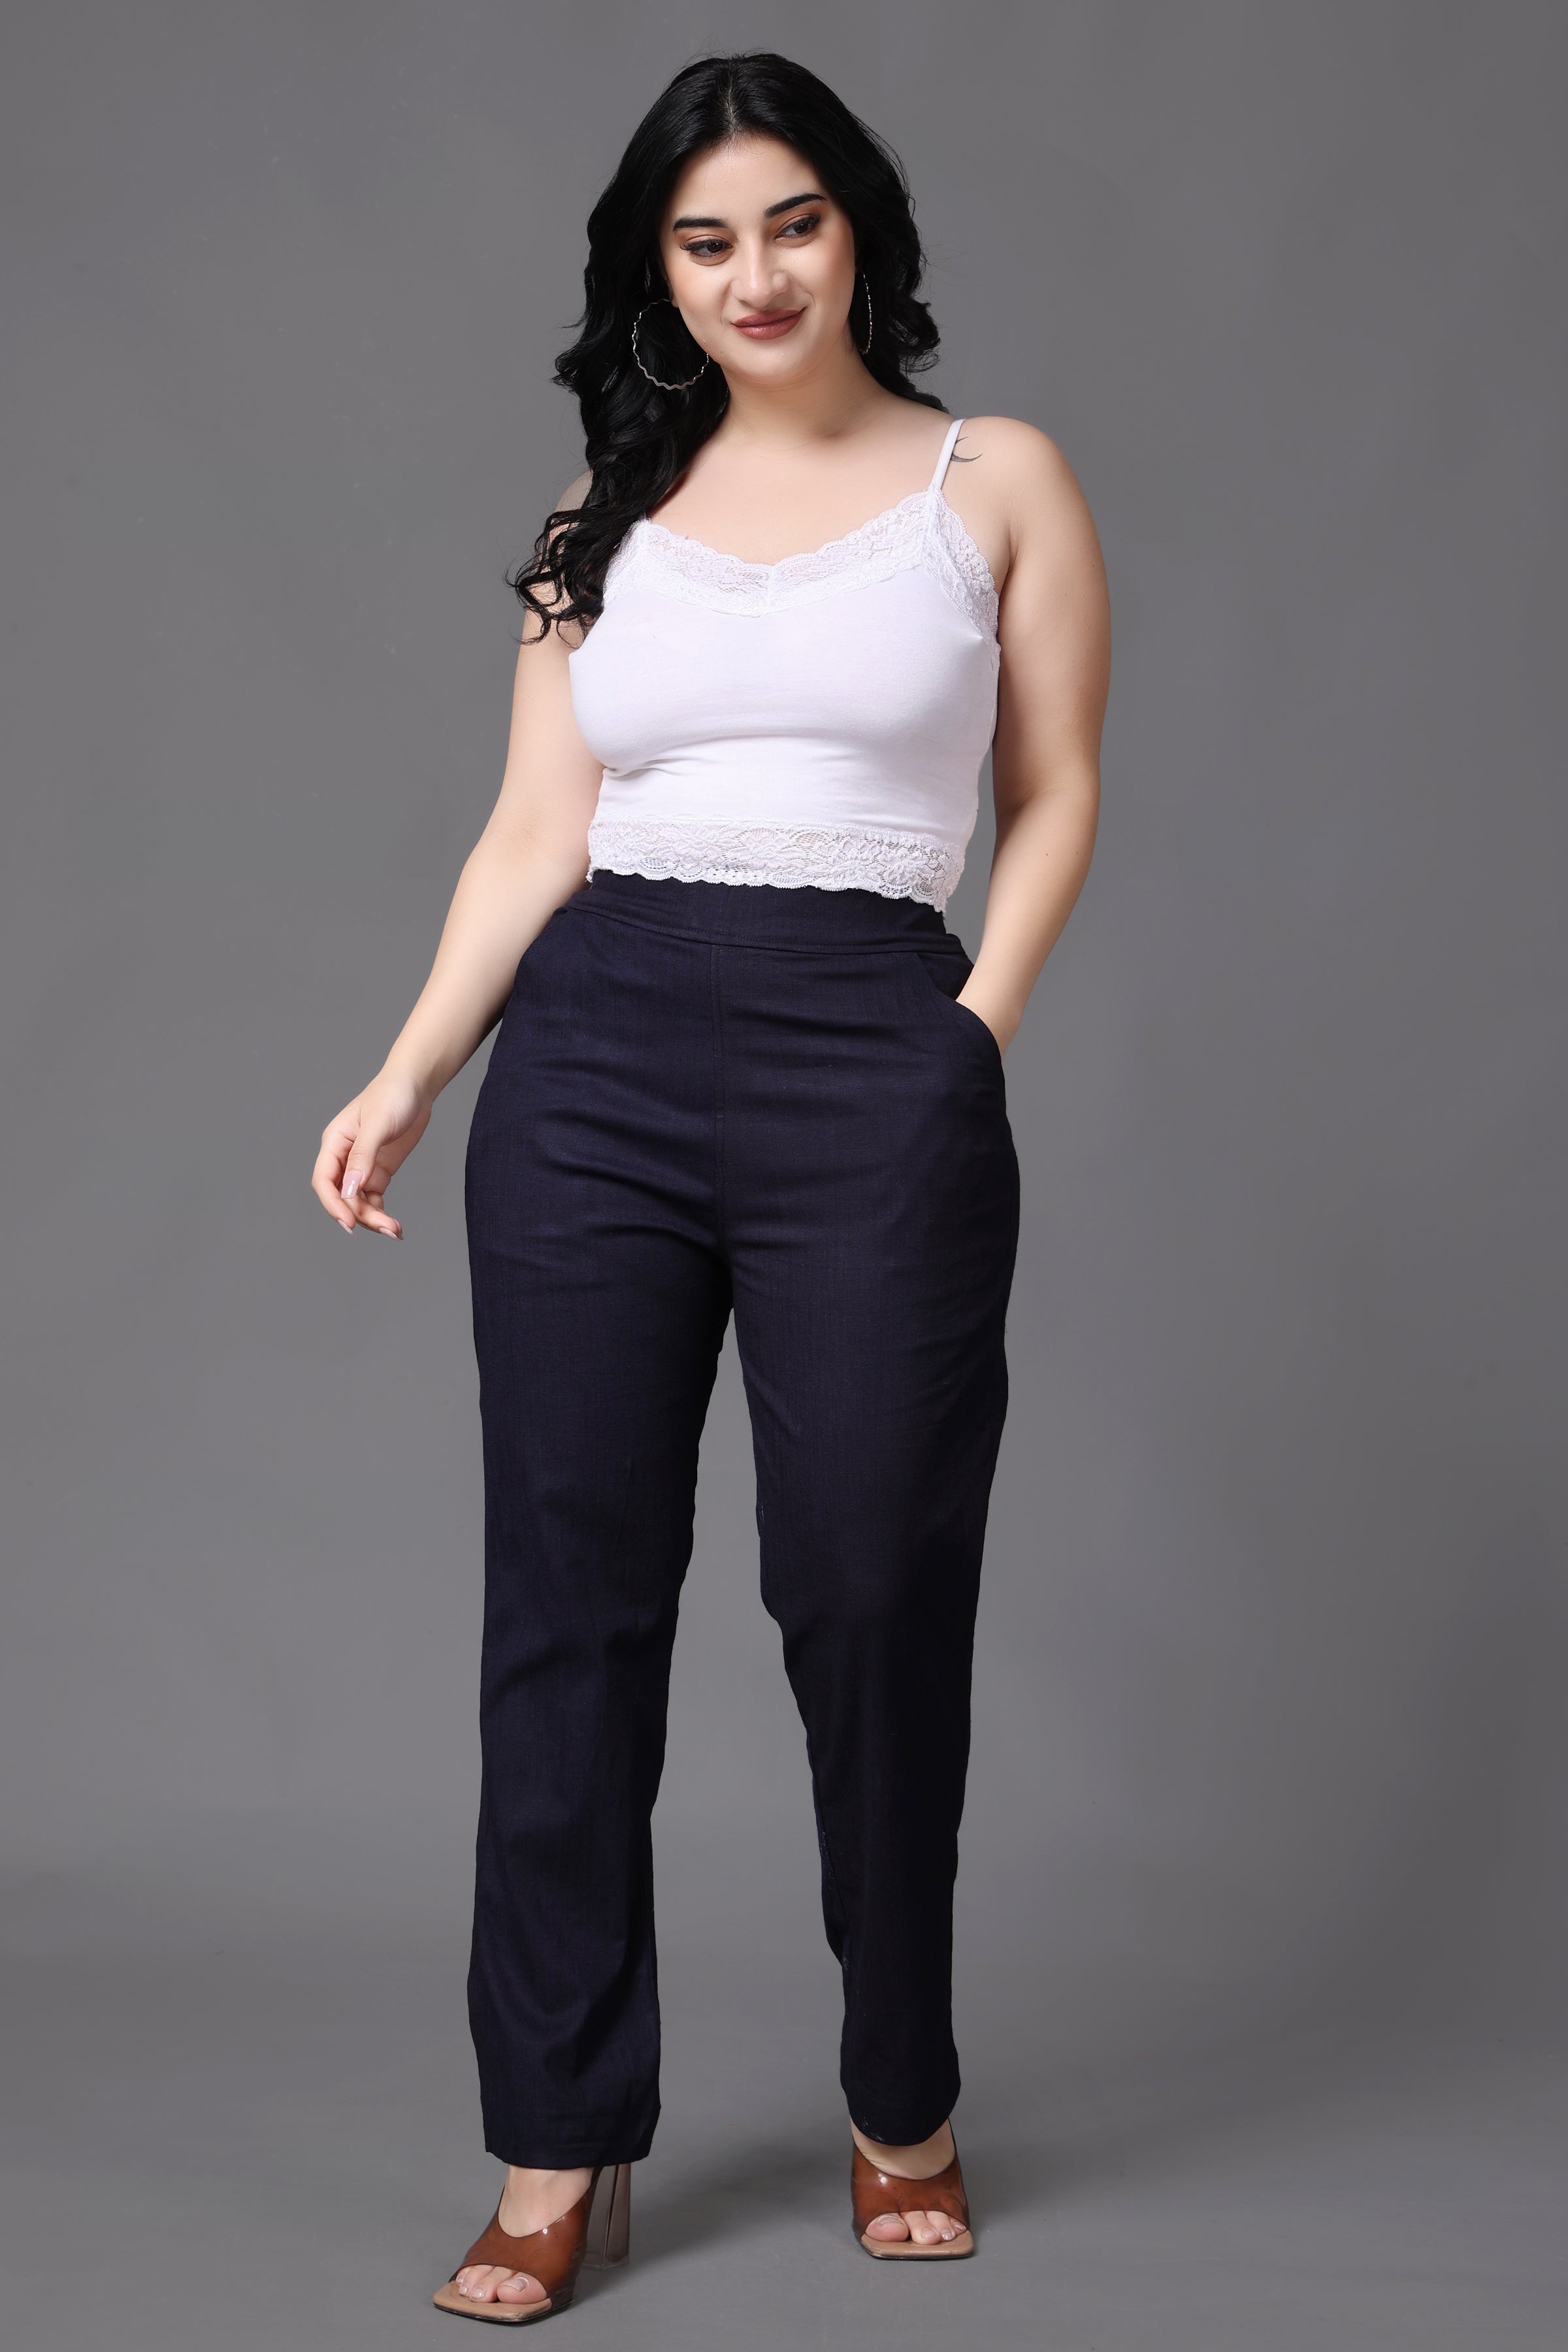 Jeggings for Women/Girls Stretchable Formals/Casual - Women - 1720902182